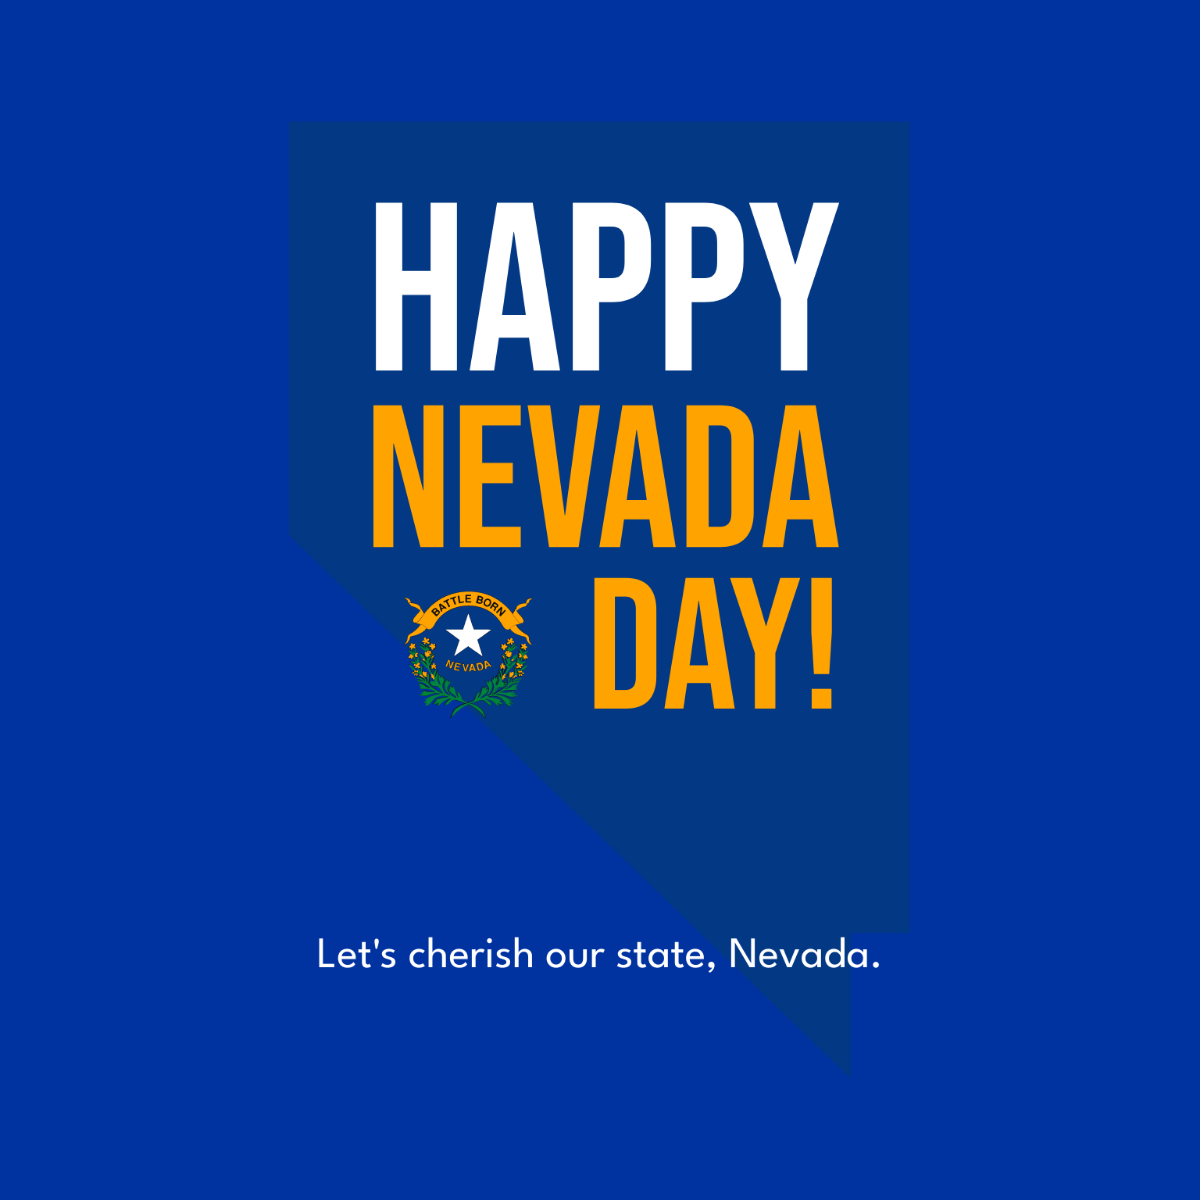 Free Nevada Day Flyer Vector Template